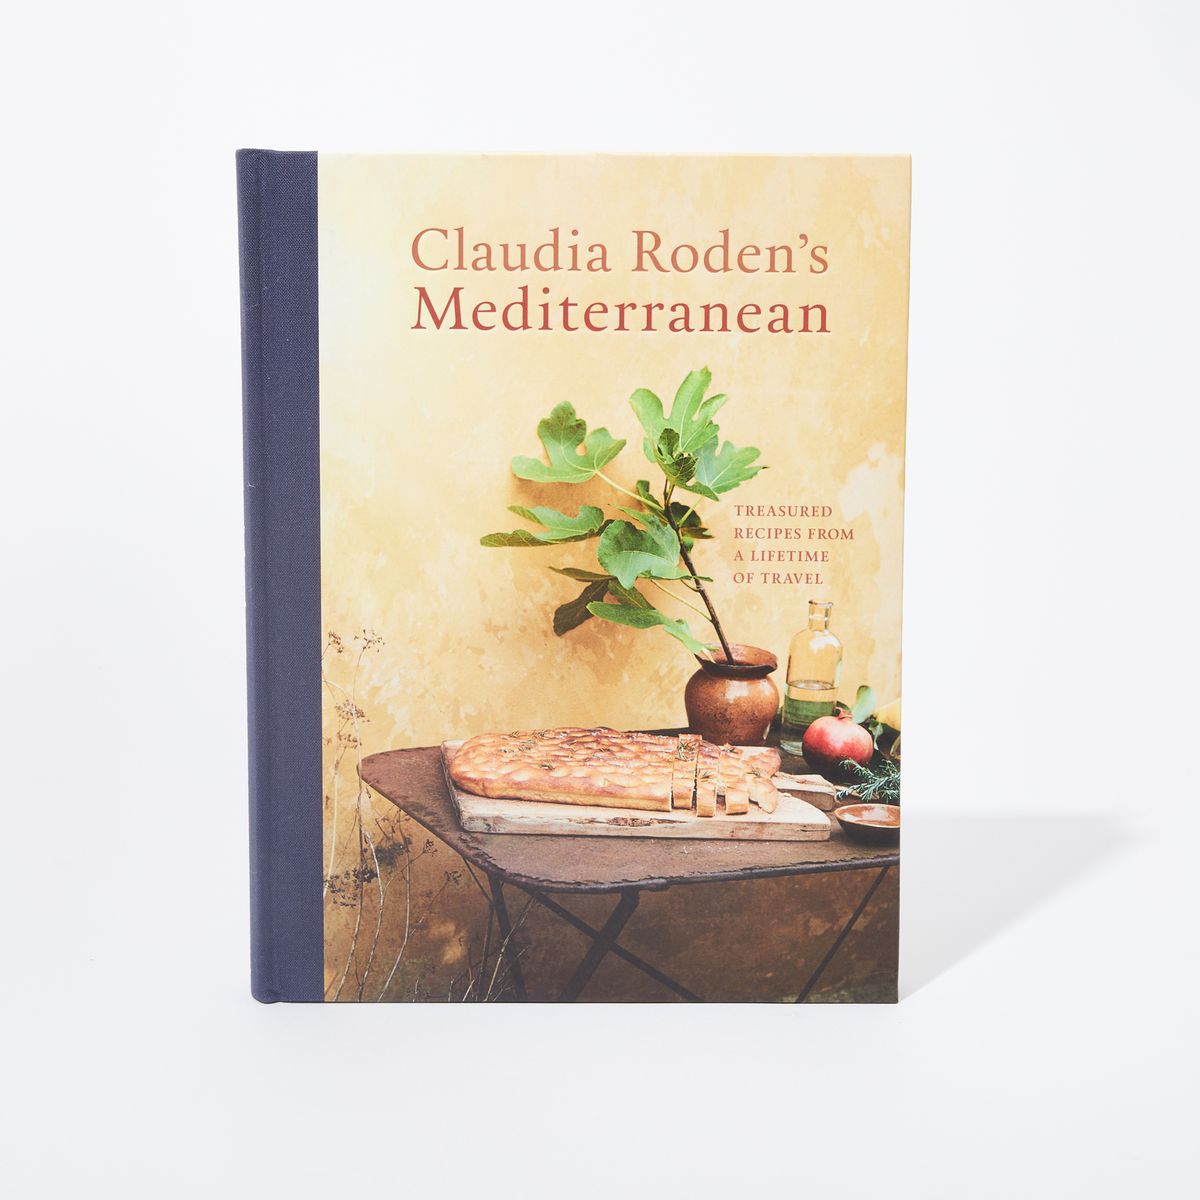 Cover of book with a photo of sliced focaccia on a cutting board next to a fig branch and pomegranate with the title above in a serif font, "Claudia Roden's Mediterranean"